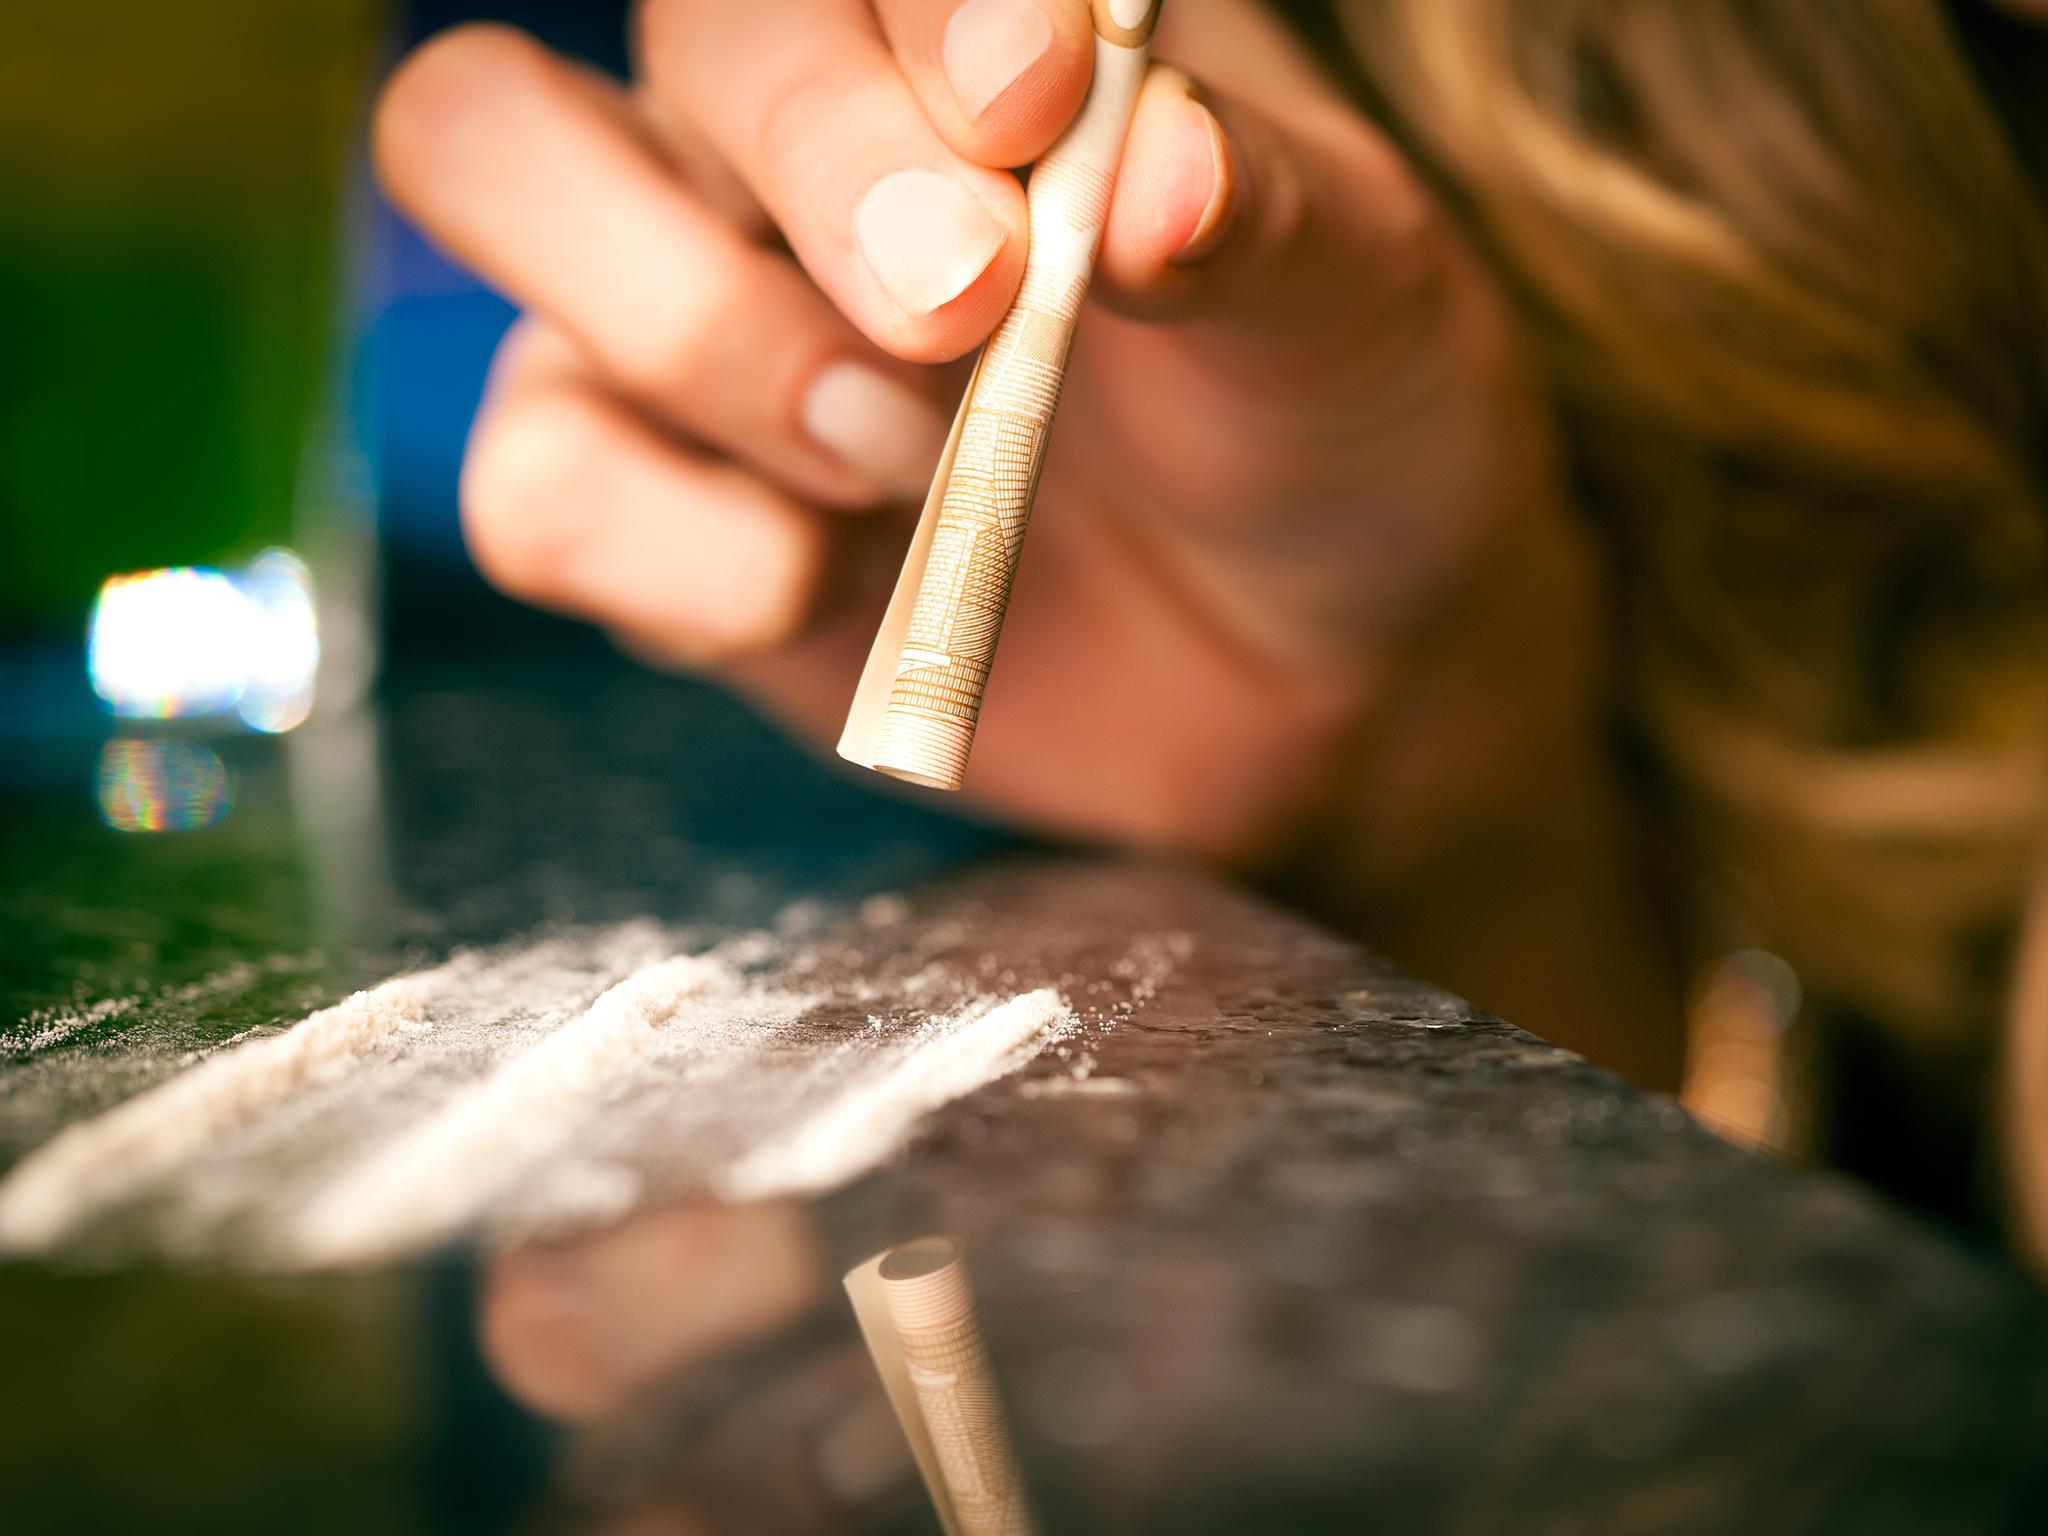 Drug abuse changes the way women